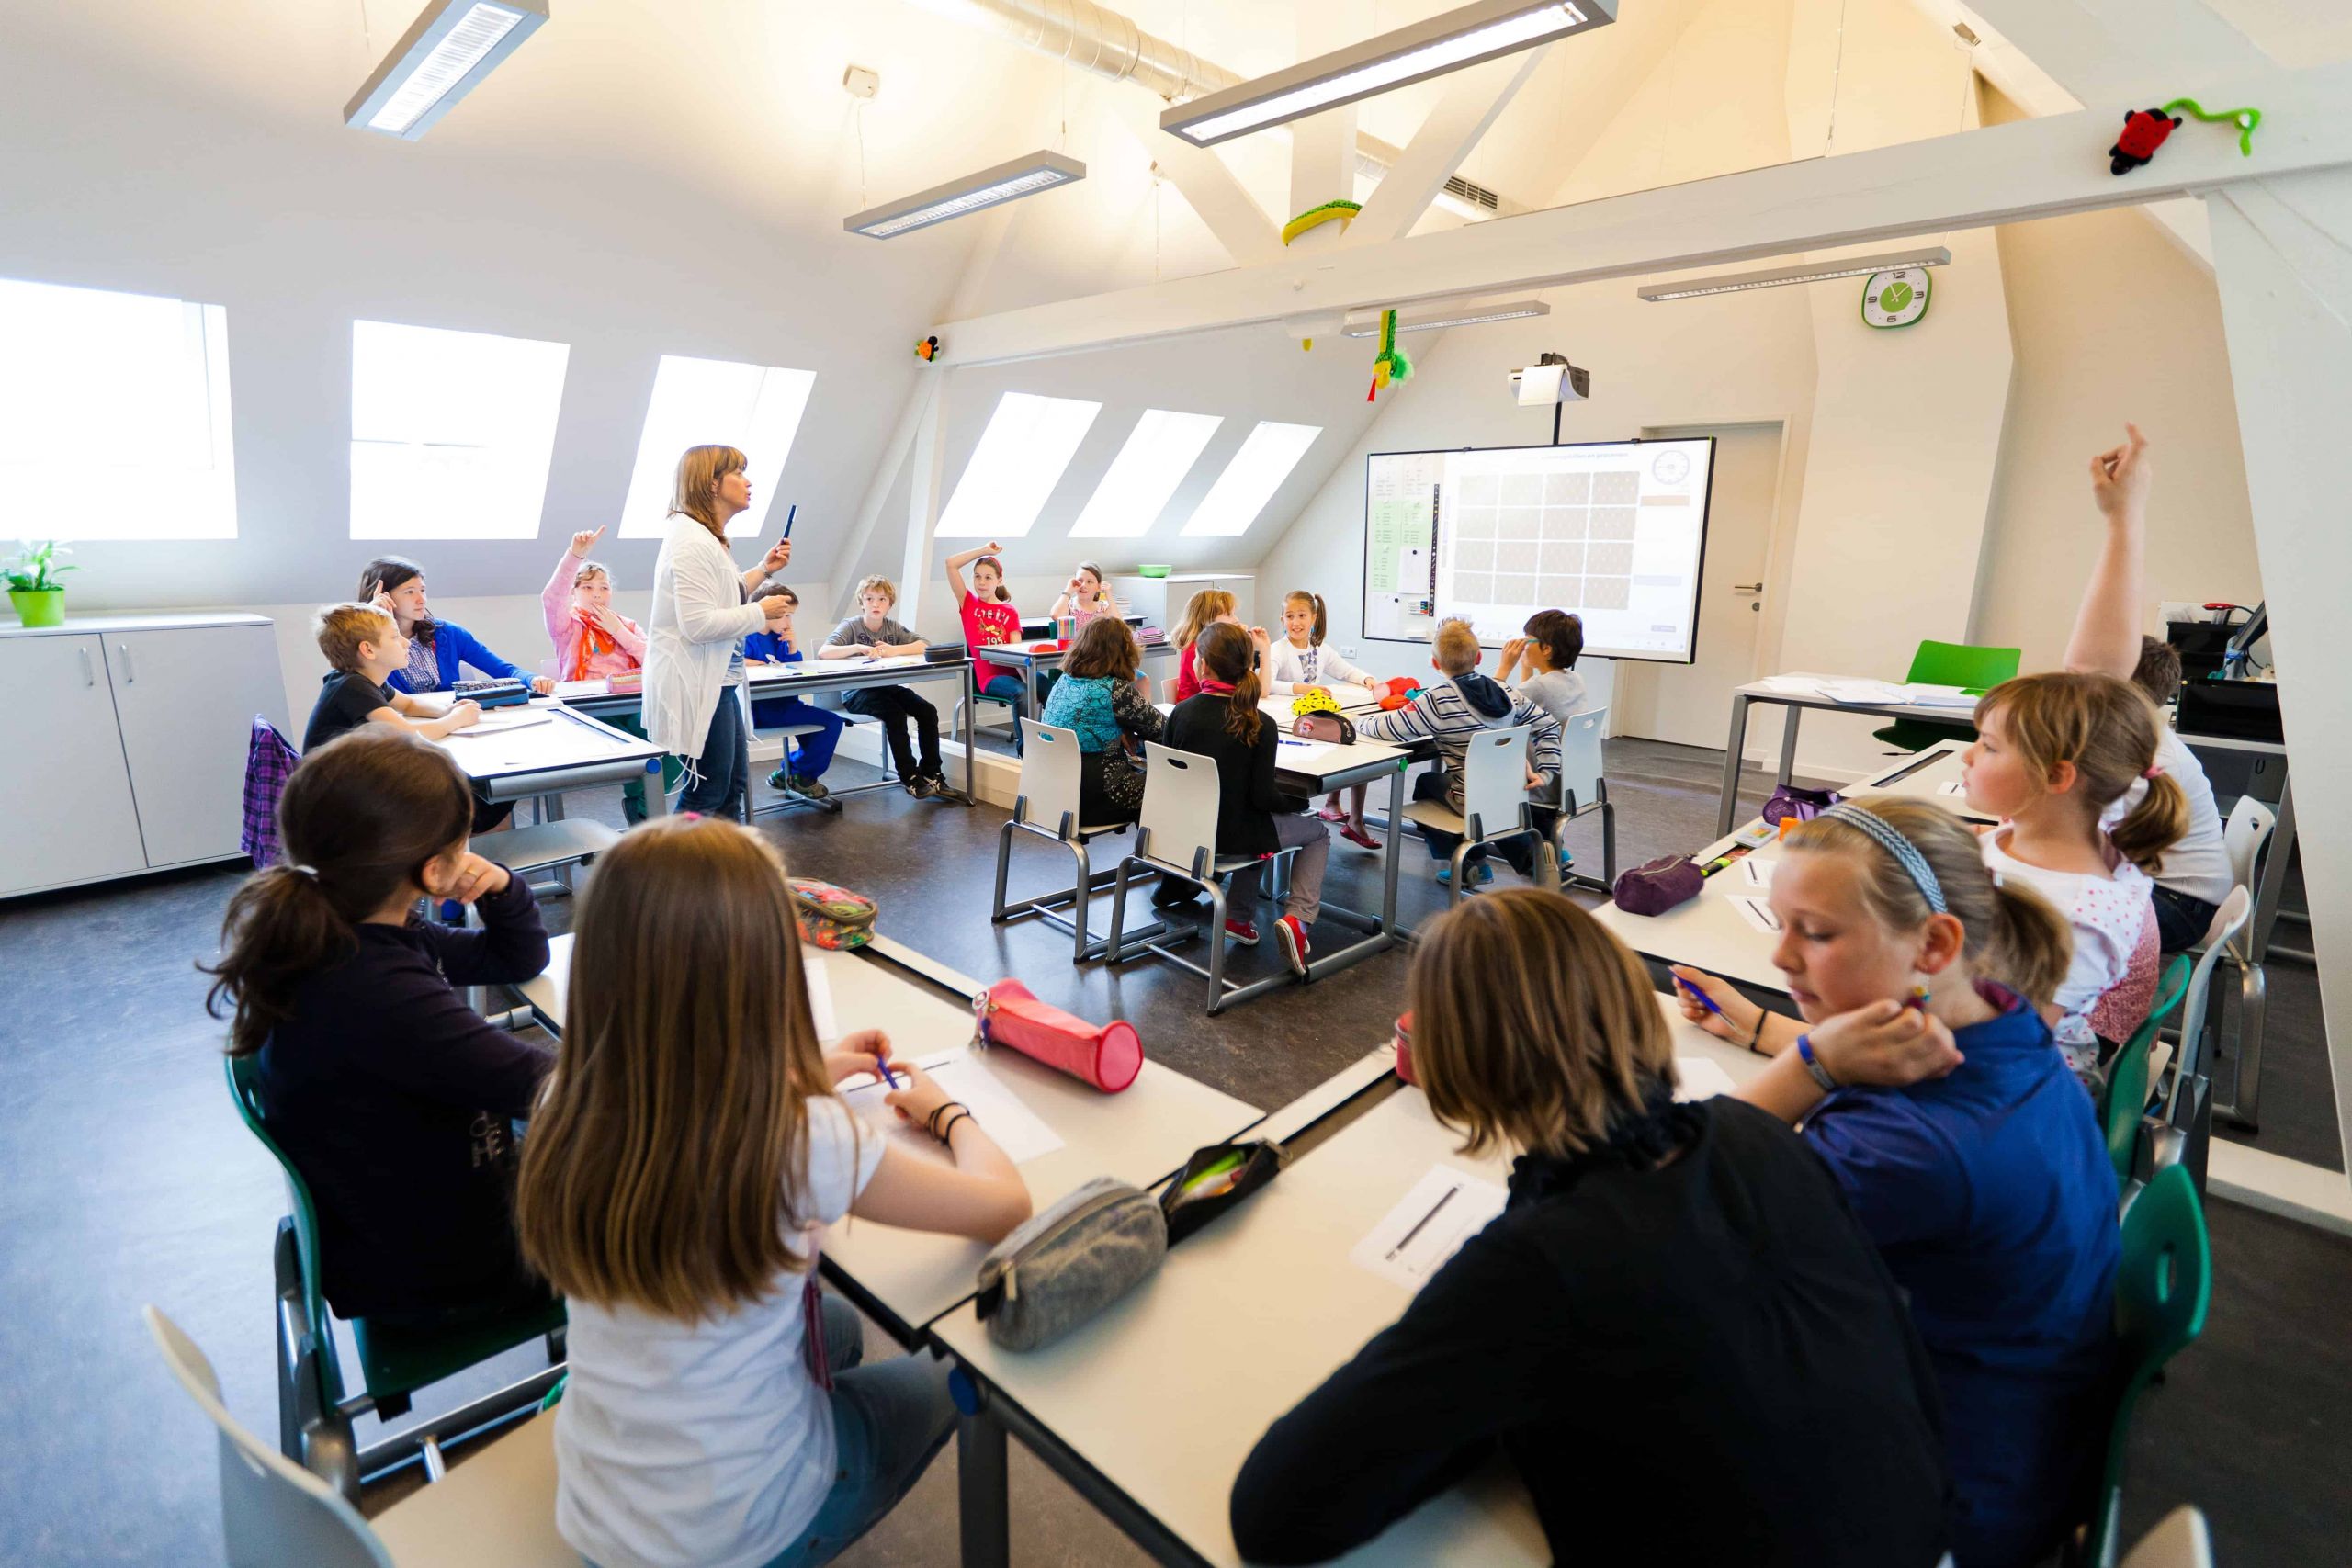 Class Room For Kids
 4 Key Elements of 21st Century Classroom Design